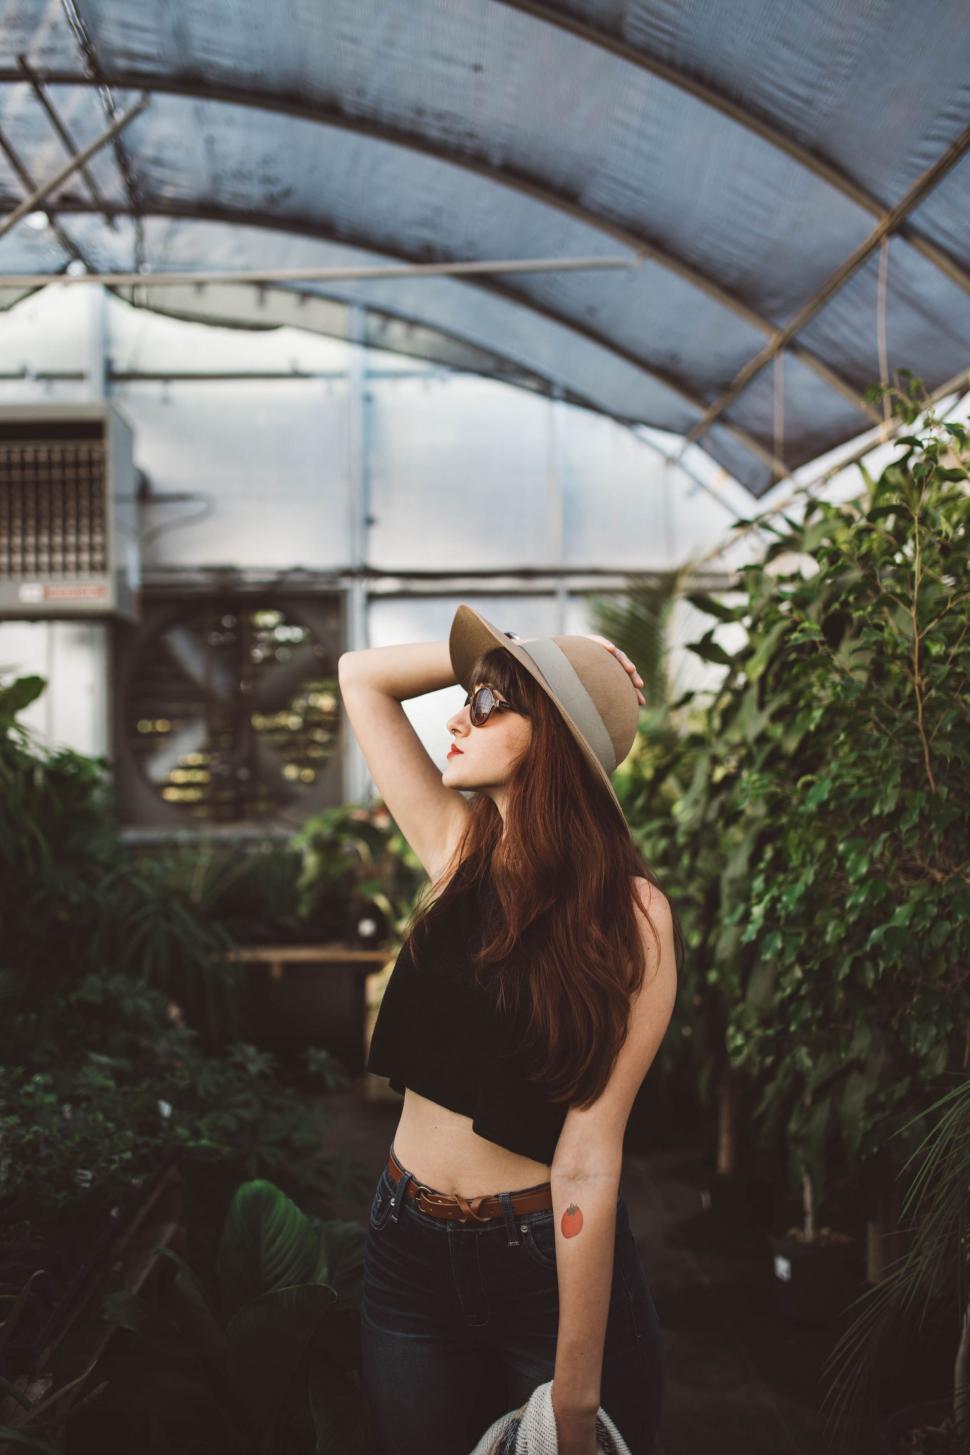 Free Image of Woman Standing in Greenhouse With Hat 